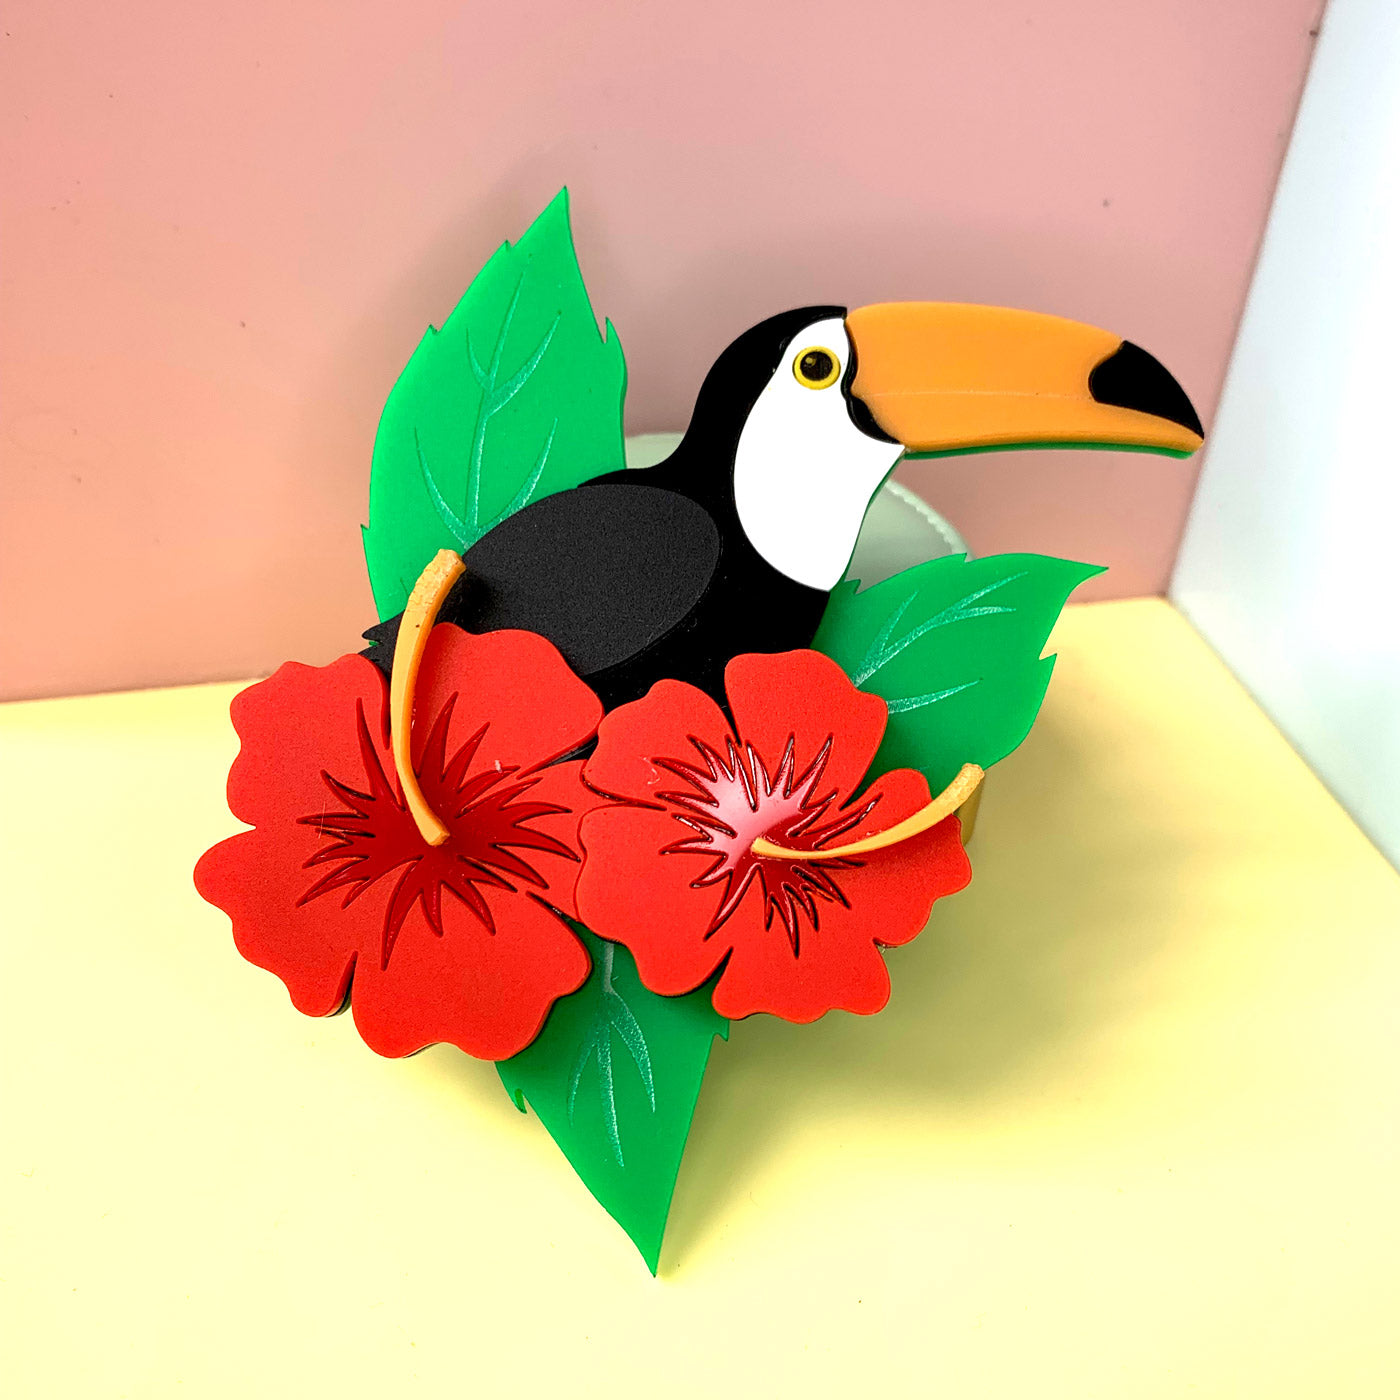 Wicker Darling's Tucano the toucan brooch on a colourful background